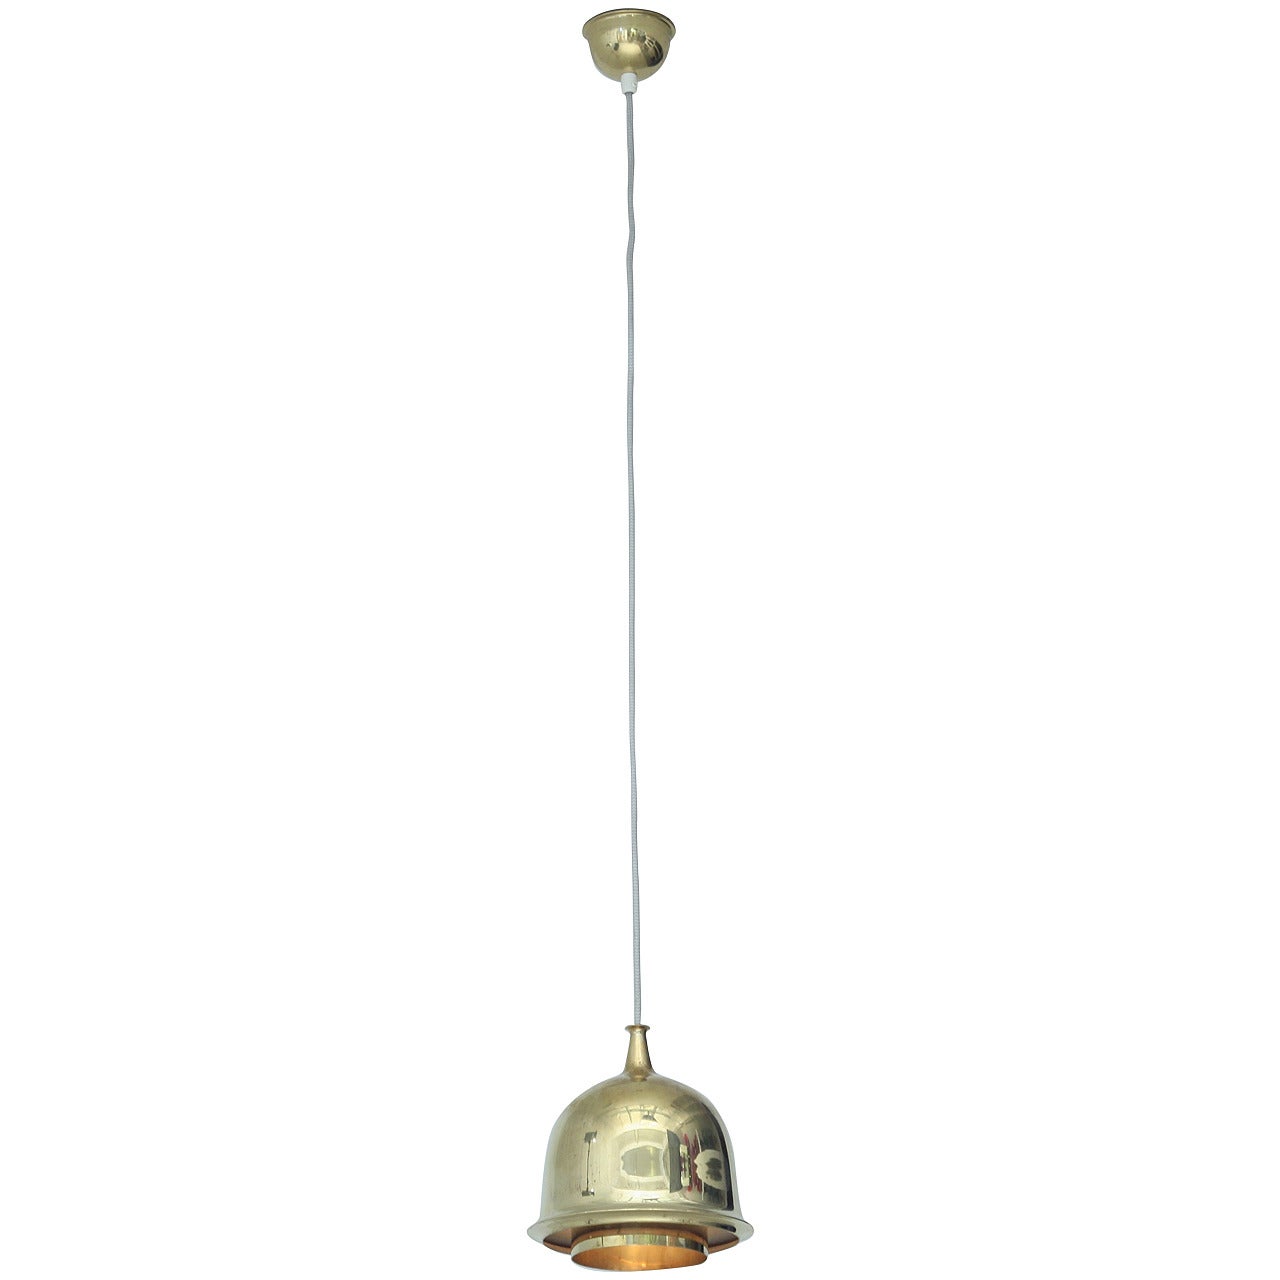 Paavo Tynell Model 51161 Pendant Lamp. Taito, Finland, 1950s For Sale